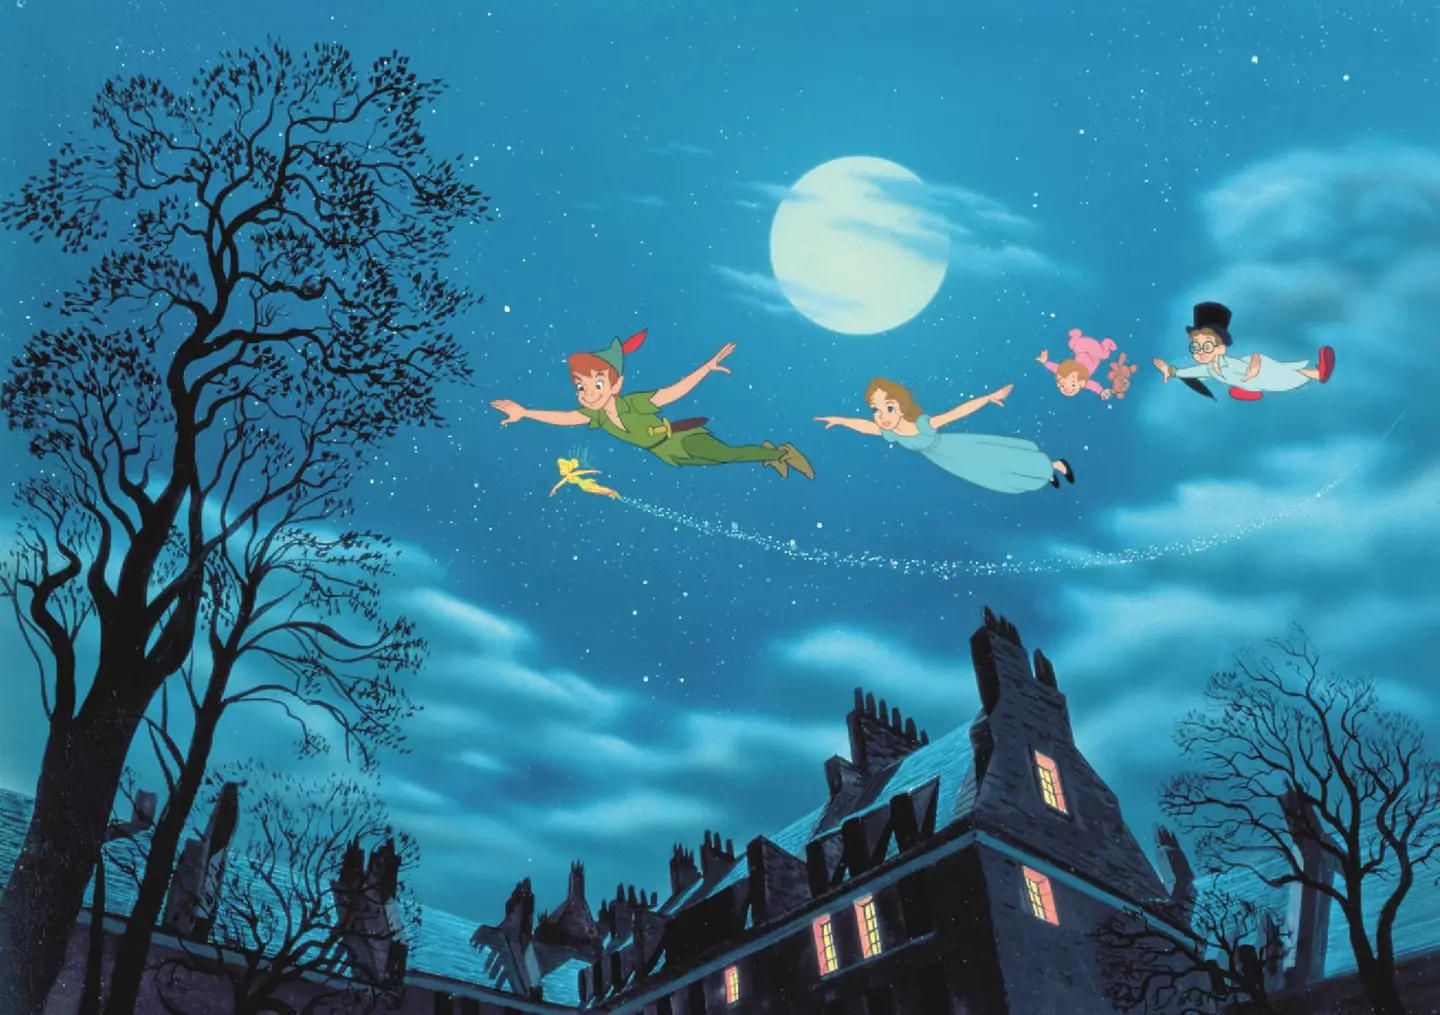 Some thought it only happened at the start of the Peter Pan film.